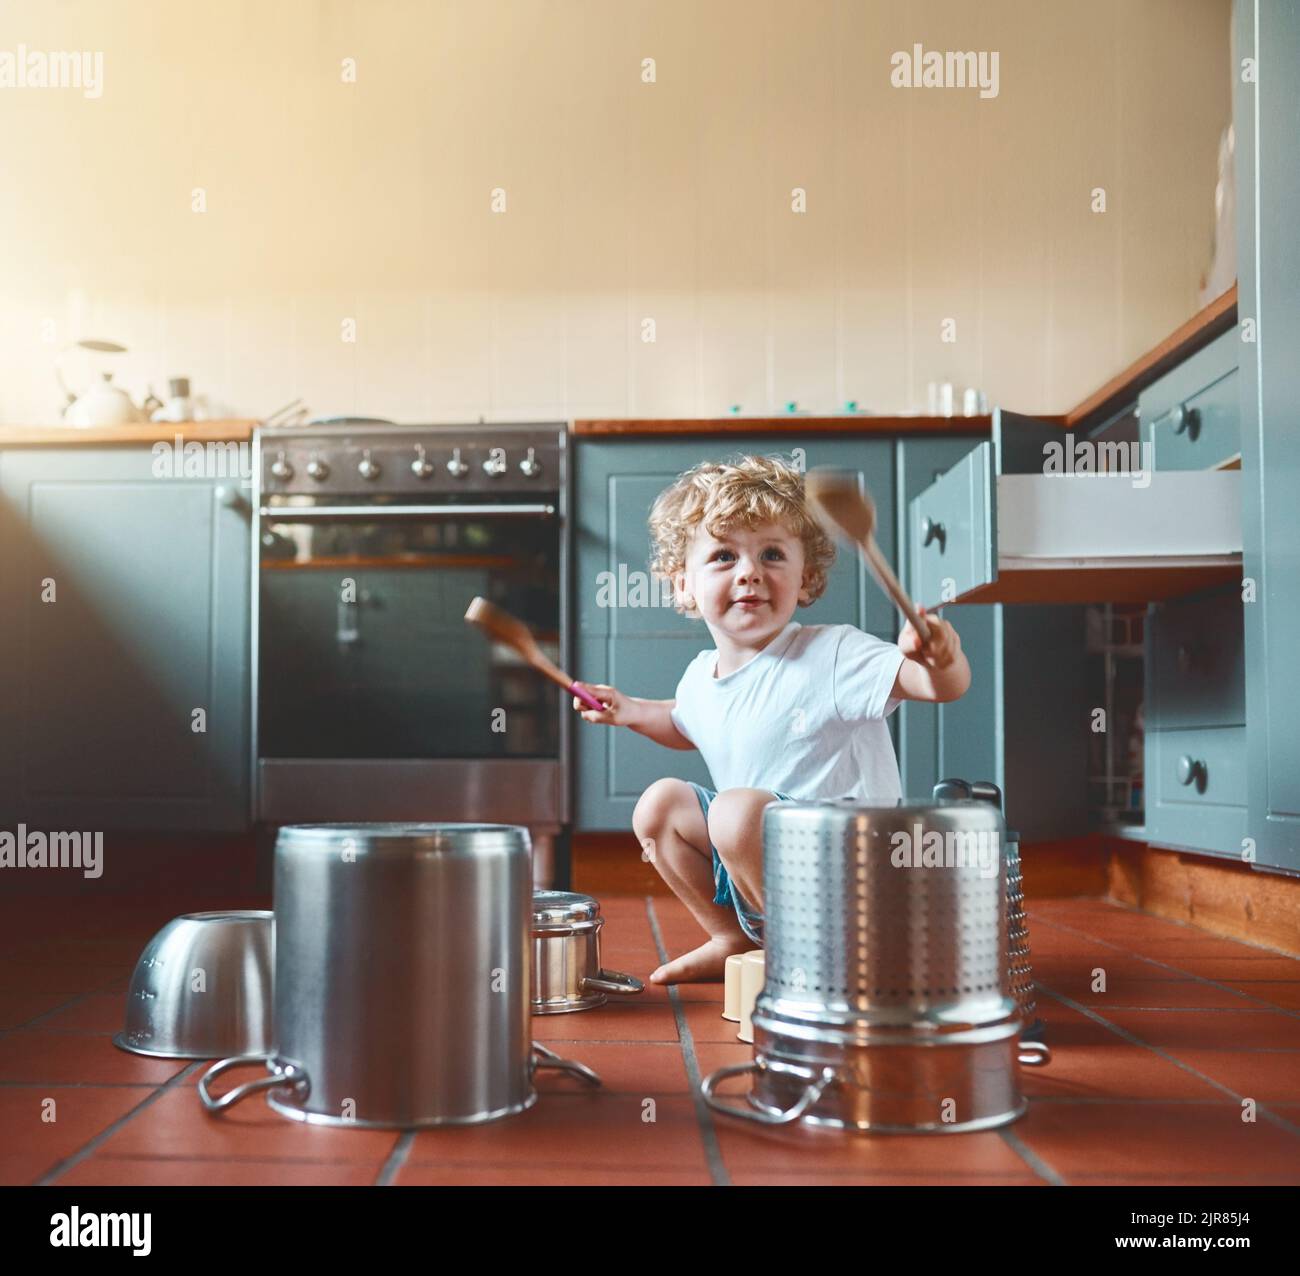 He wants to be a drummer when he grows up. Portrait of an adorable little boy playing with pots in the kitchen. Stock Photo